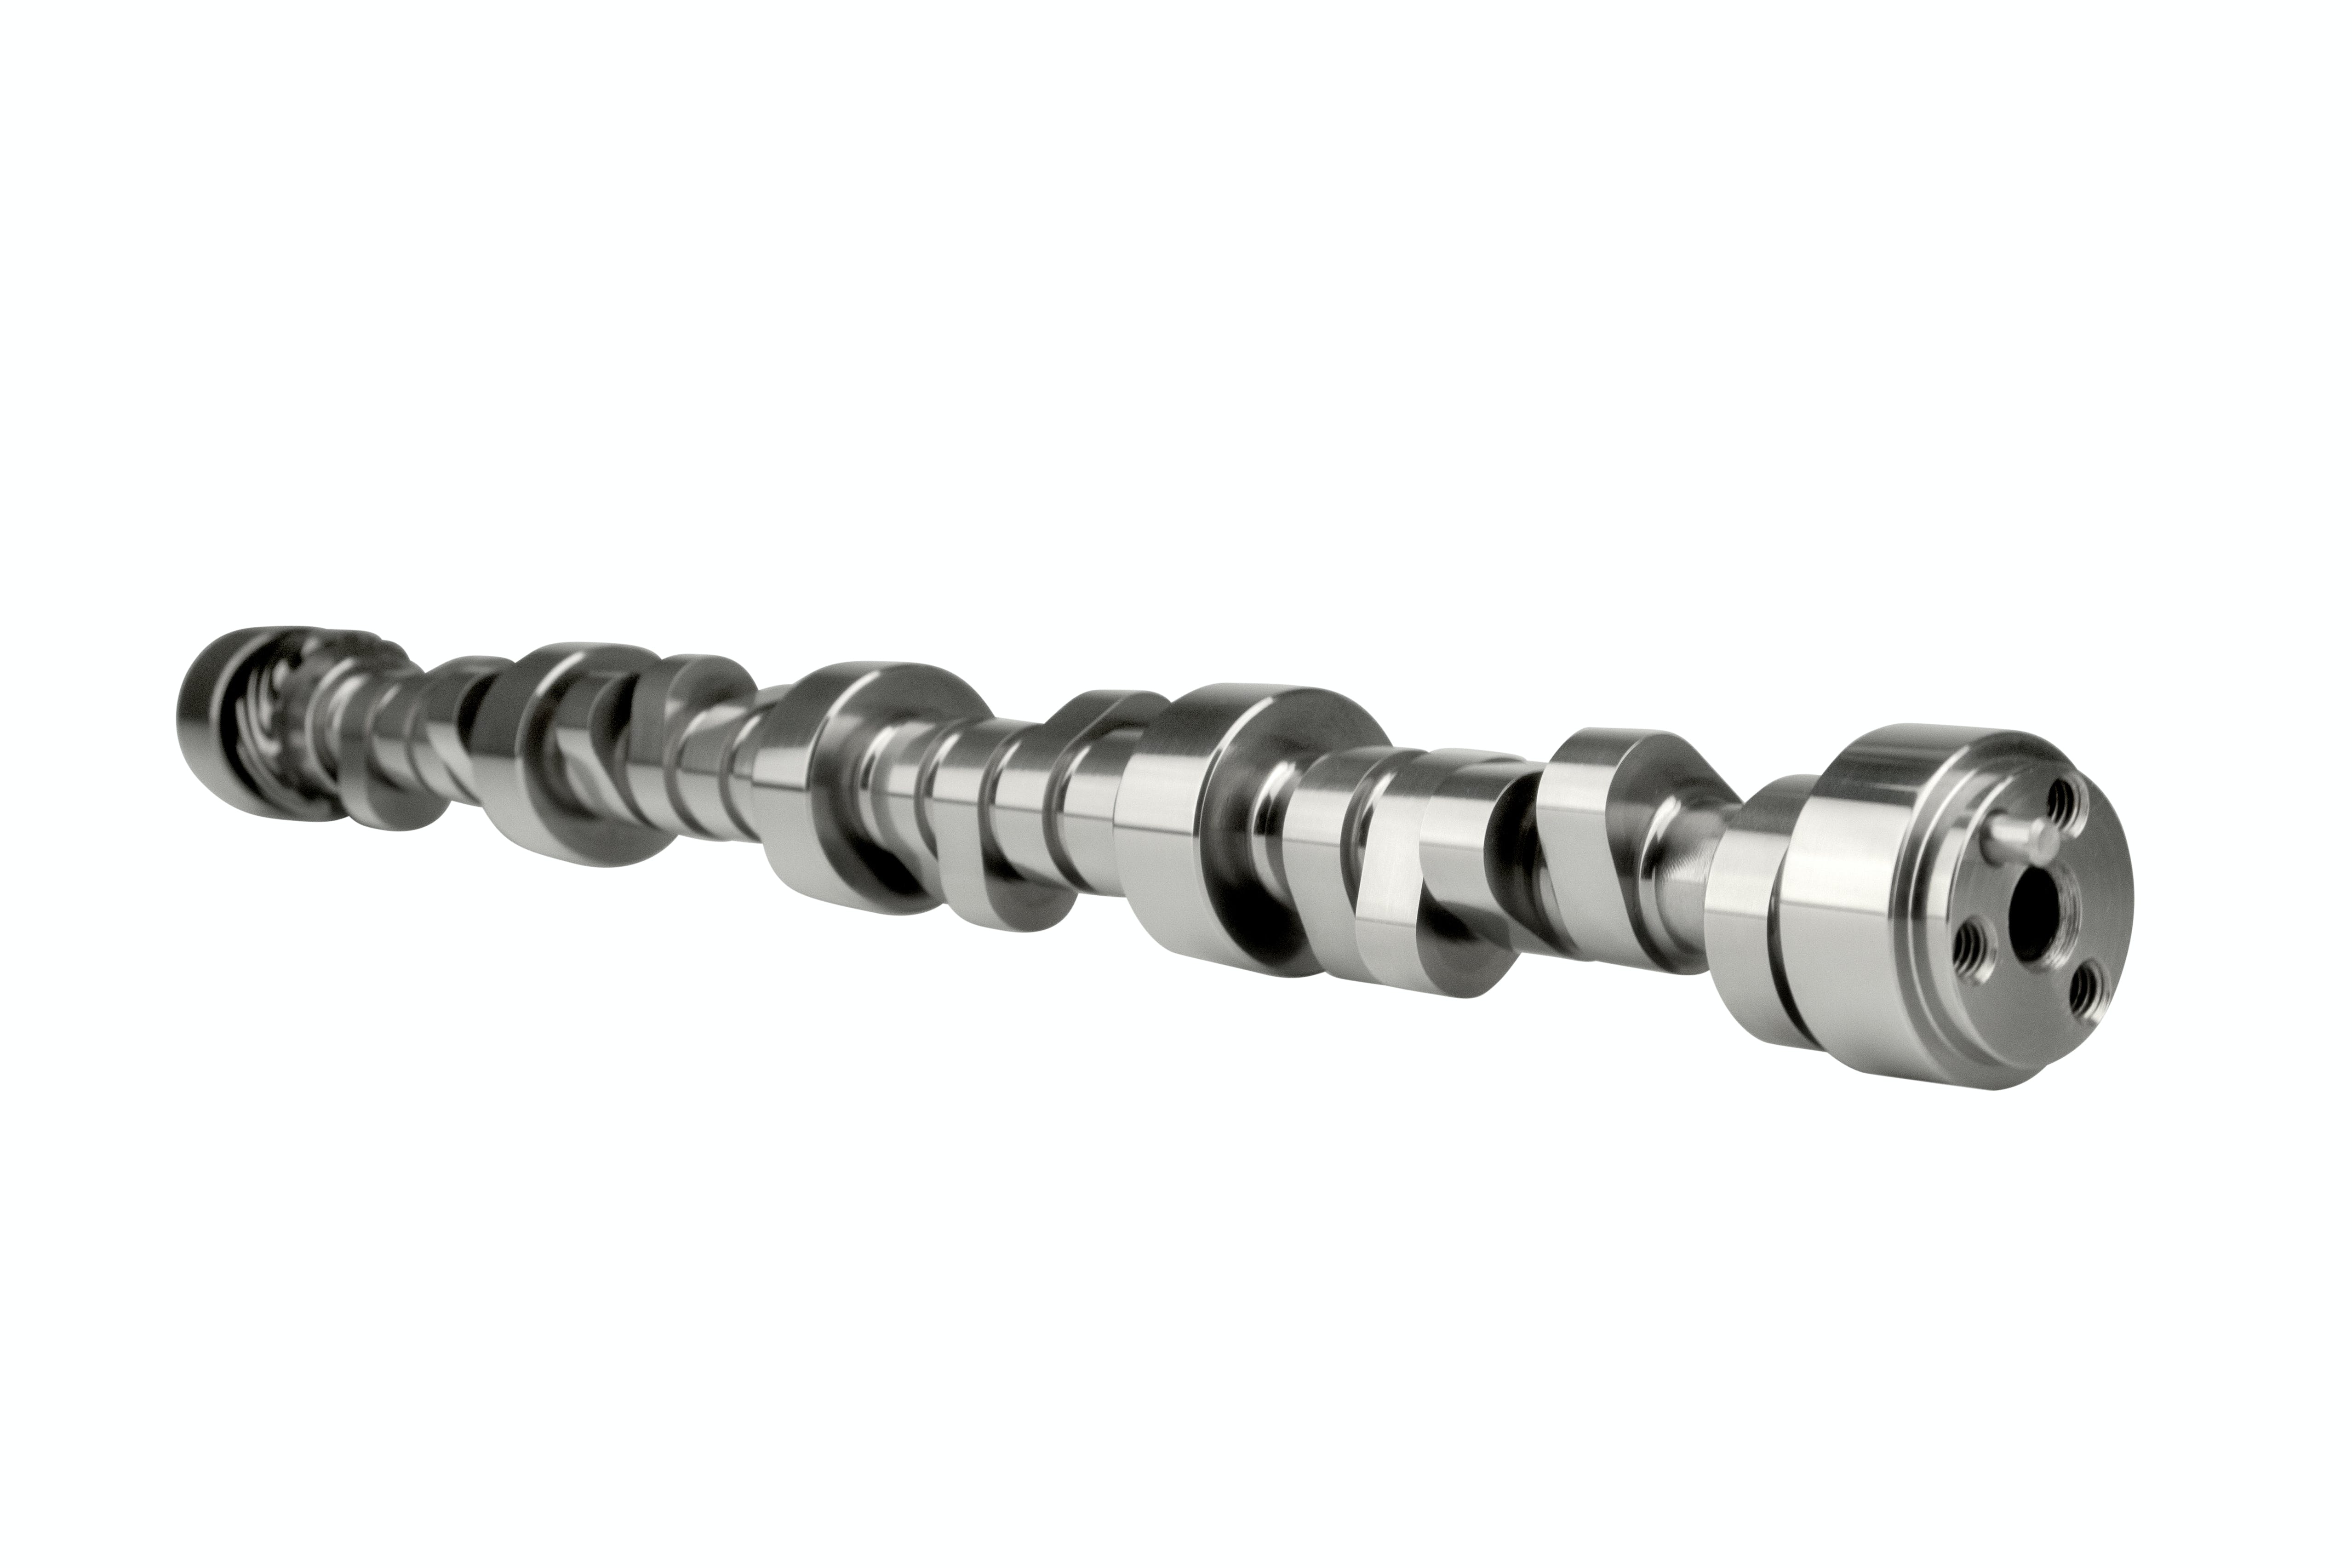 Competition Cams 08-697-11 Hustler 603/604 Crate Engine Hydraulic Roller Stage 2 Camshaft